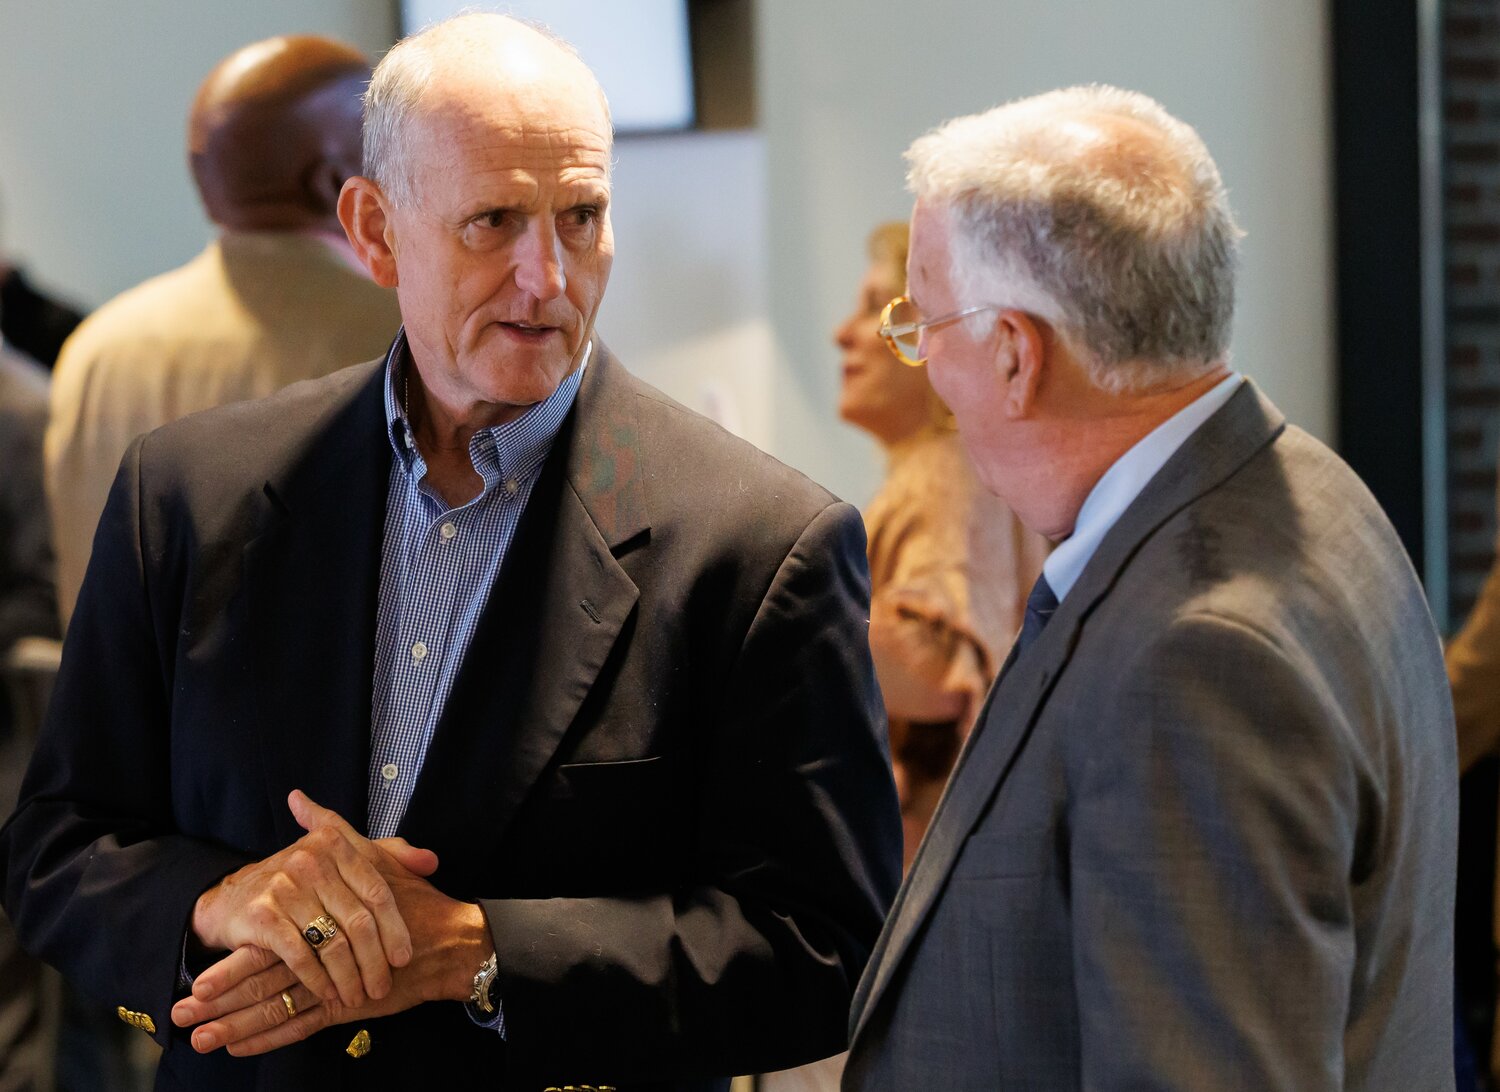 Downtown Visionaries award recipients Mac Healy, left, and Bruce Daws chat during the luncheon honoring them and Molly Arnold on Thursday at Segra Stadium.